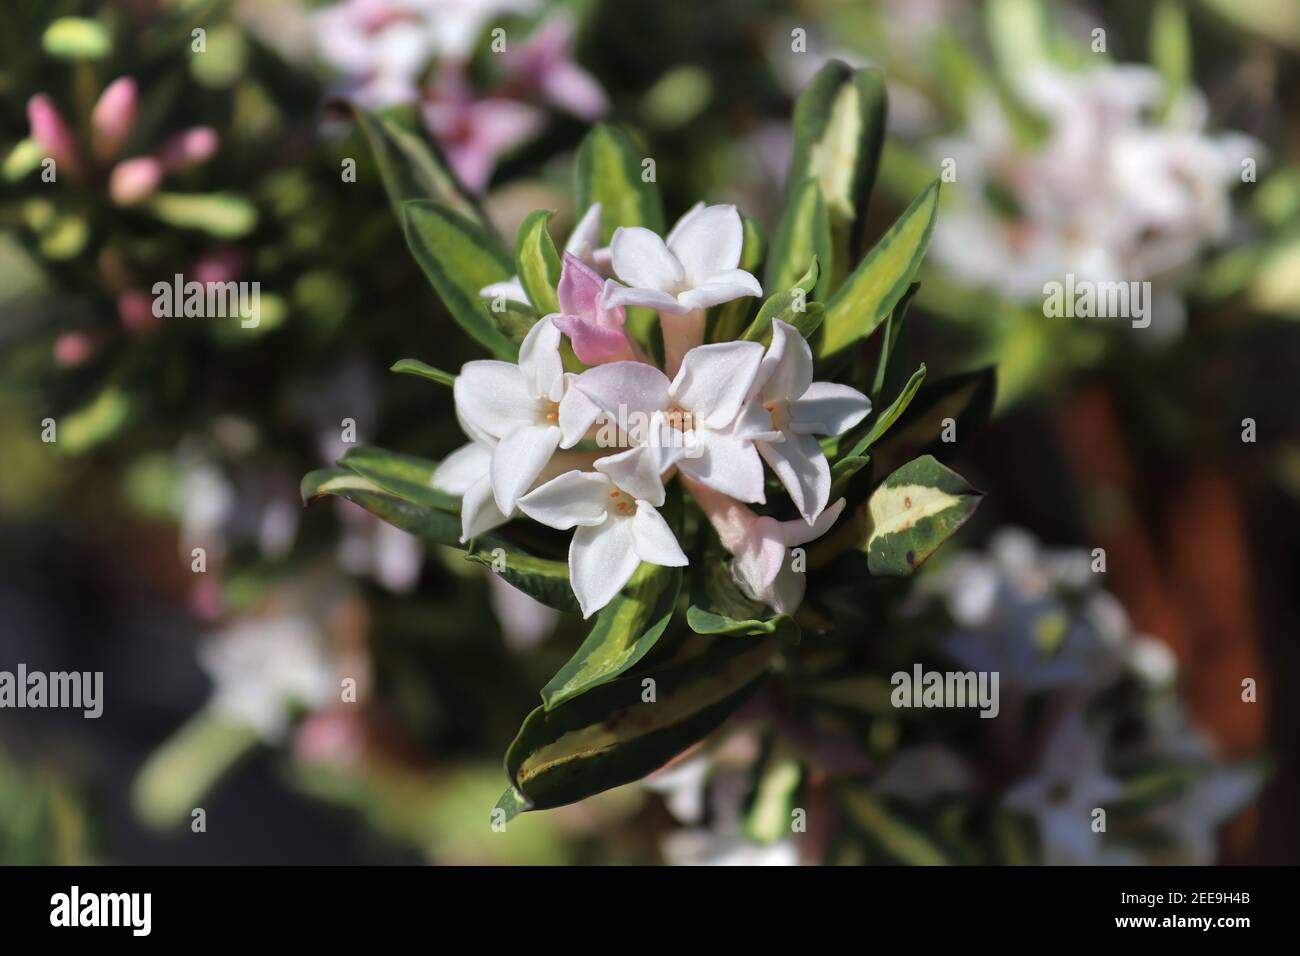 Clusters of daphne burkwoodii flower in full bloom Stock Photo